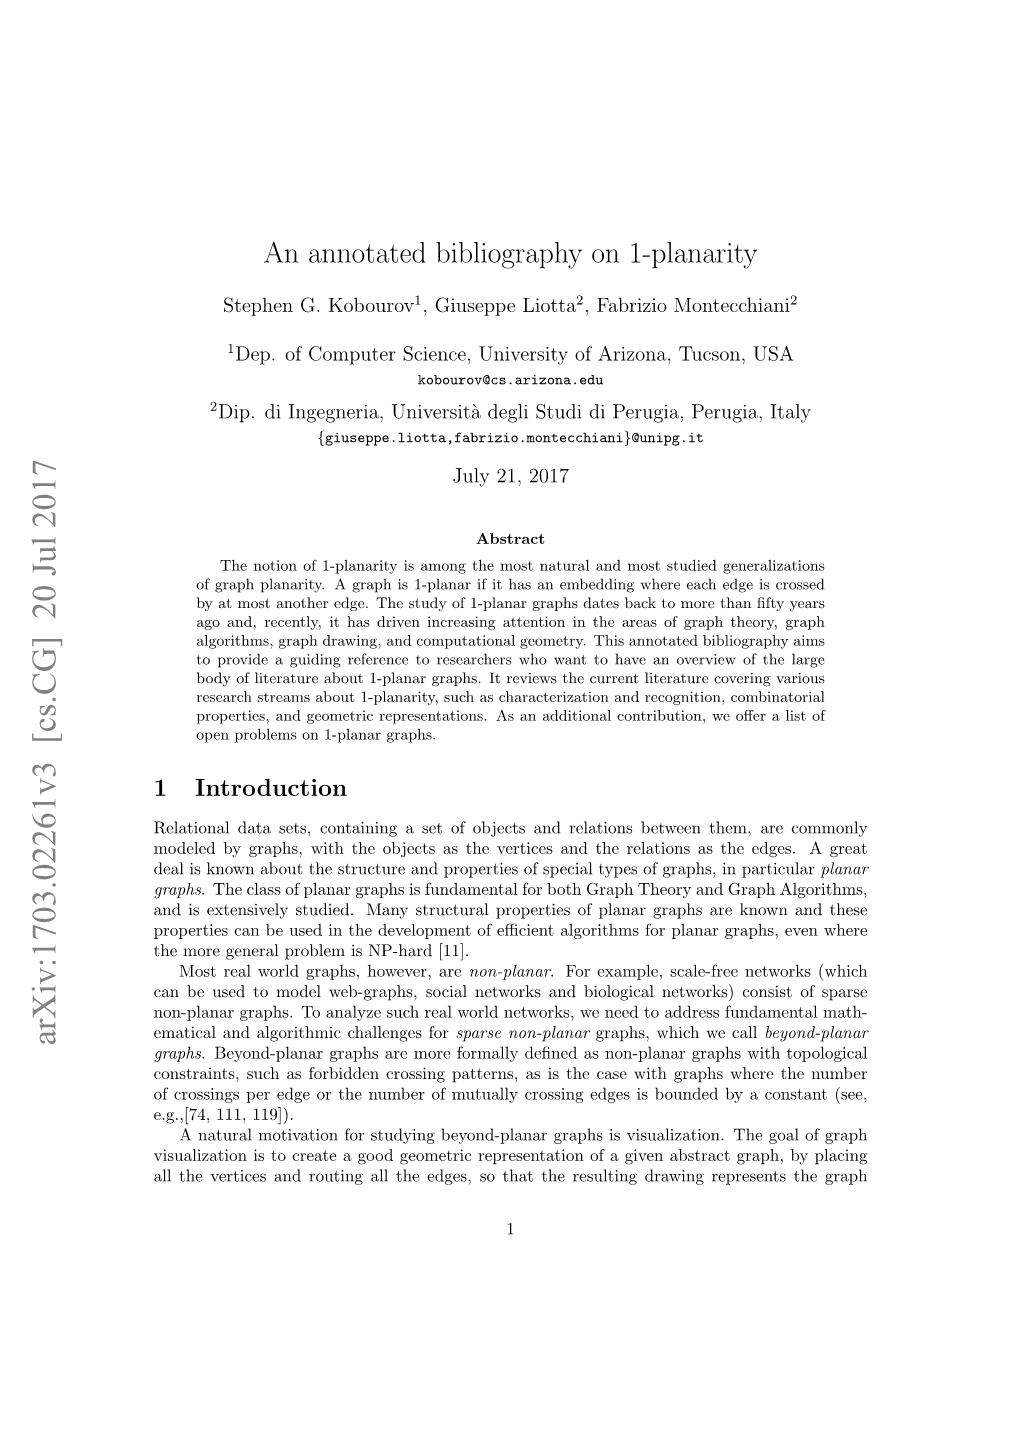 An Annotated Bibliography on 1-Planarity